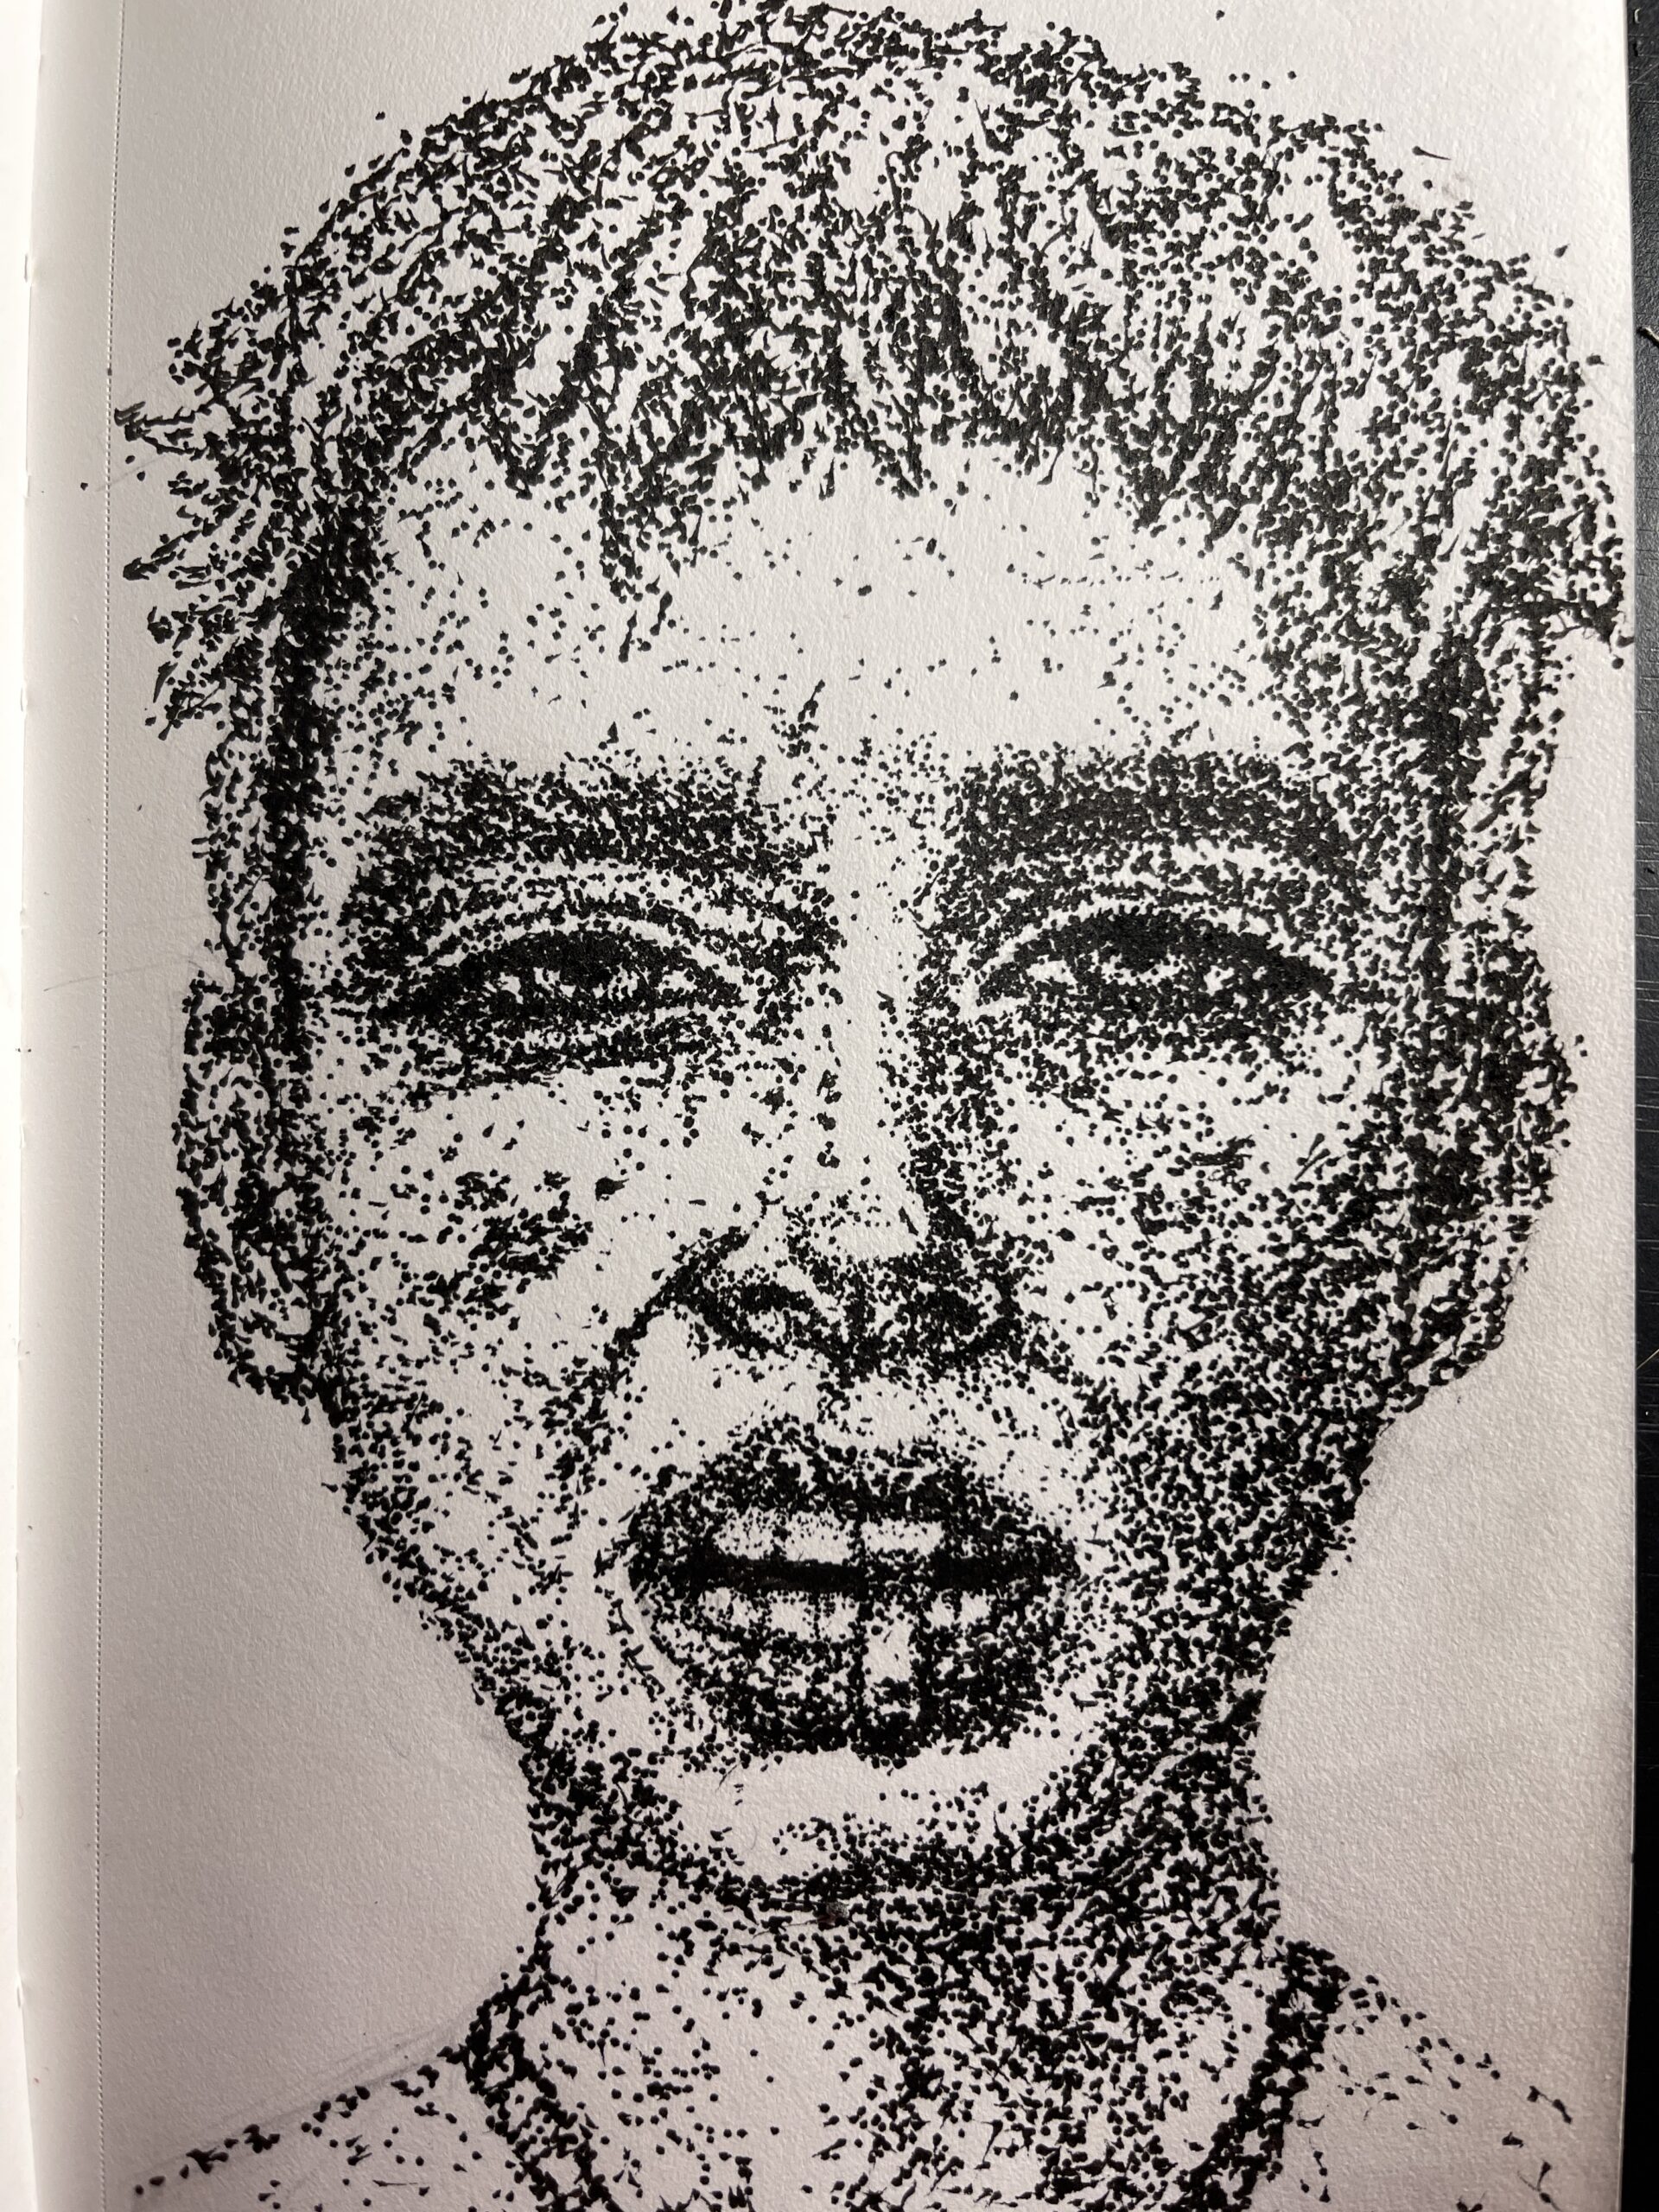 Art challenge: Drawing with dots